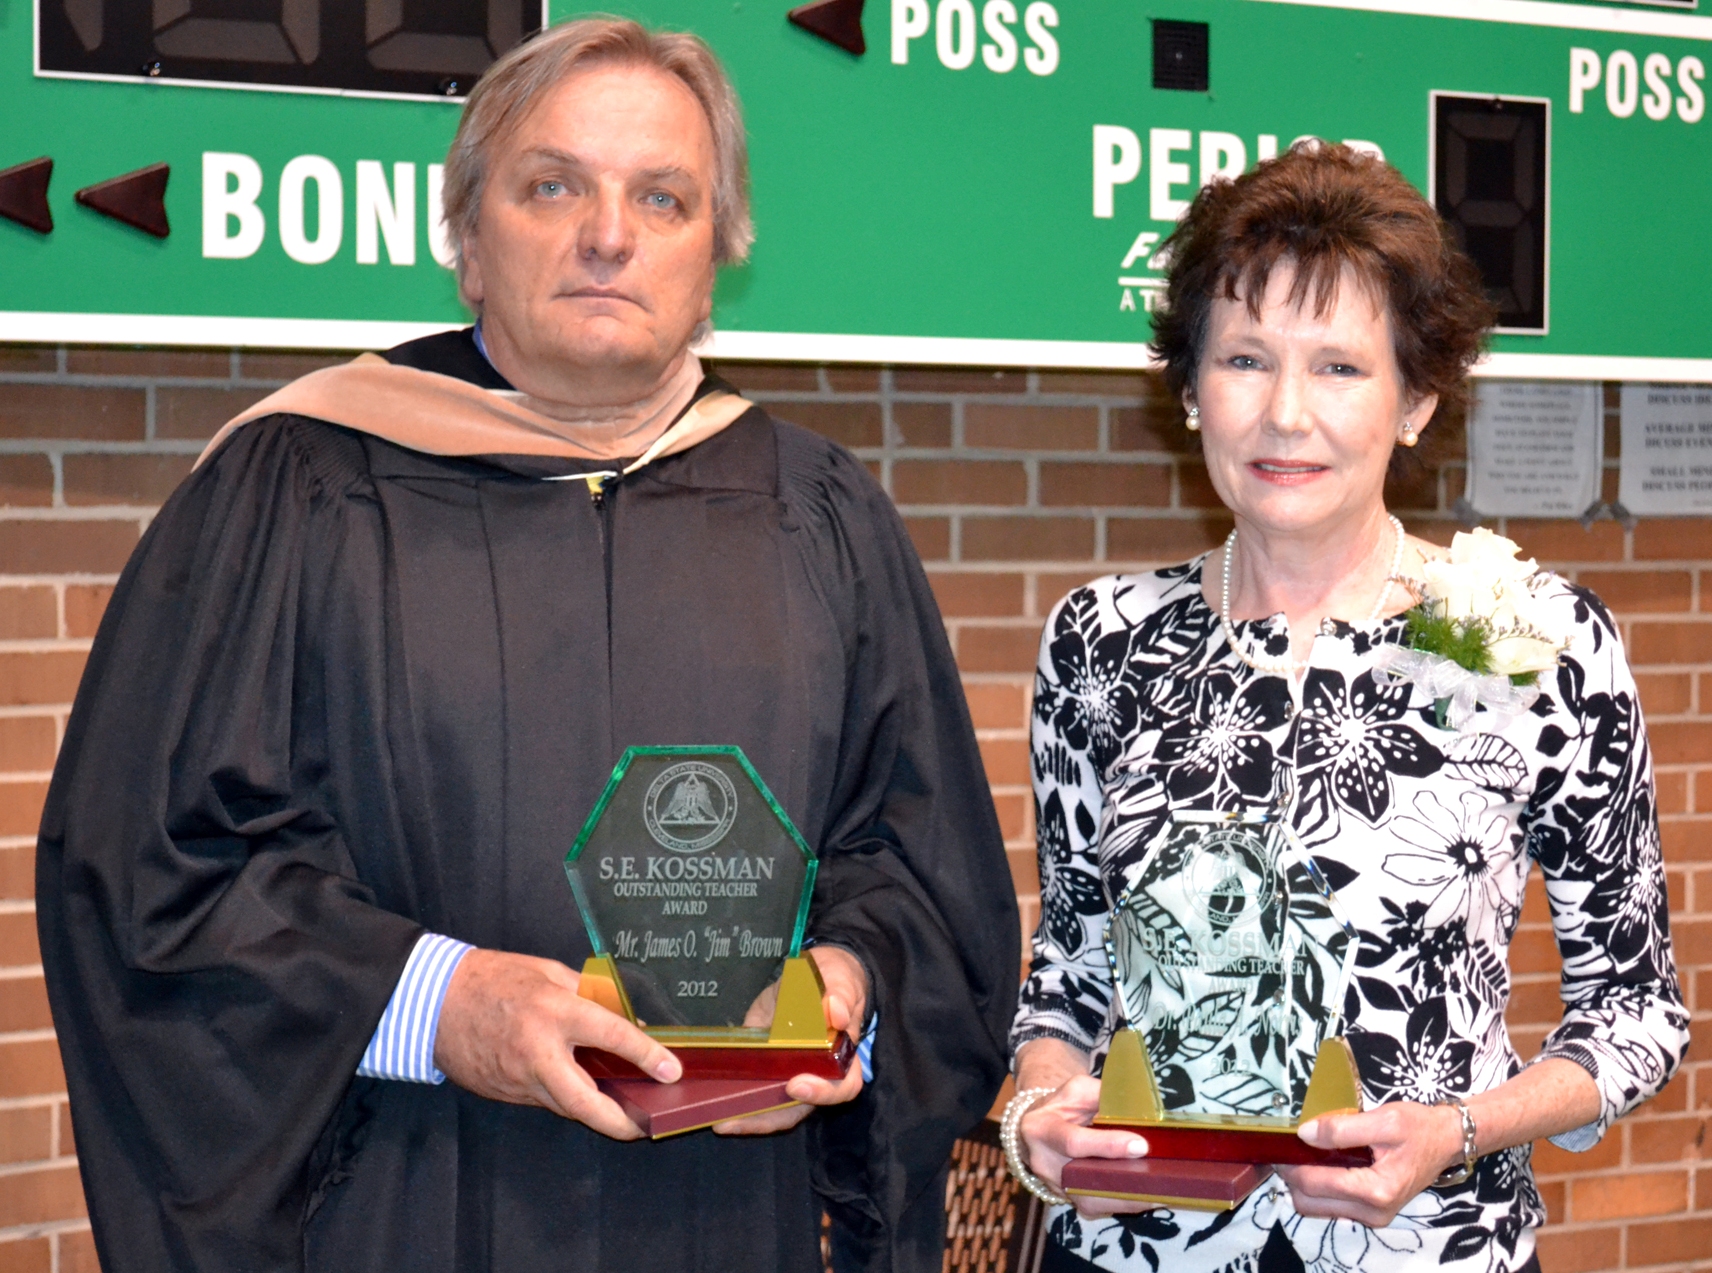 PHOTO:  Delta State University Instructor of Insurance James O. (Jim) Brown and Professor of Mathematics Dr. Paula Norris were co-recipients of the S.E. Kossman Outstanding Faculty Award presented during Spring 2012 Commencement.